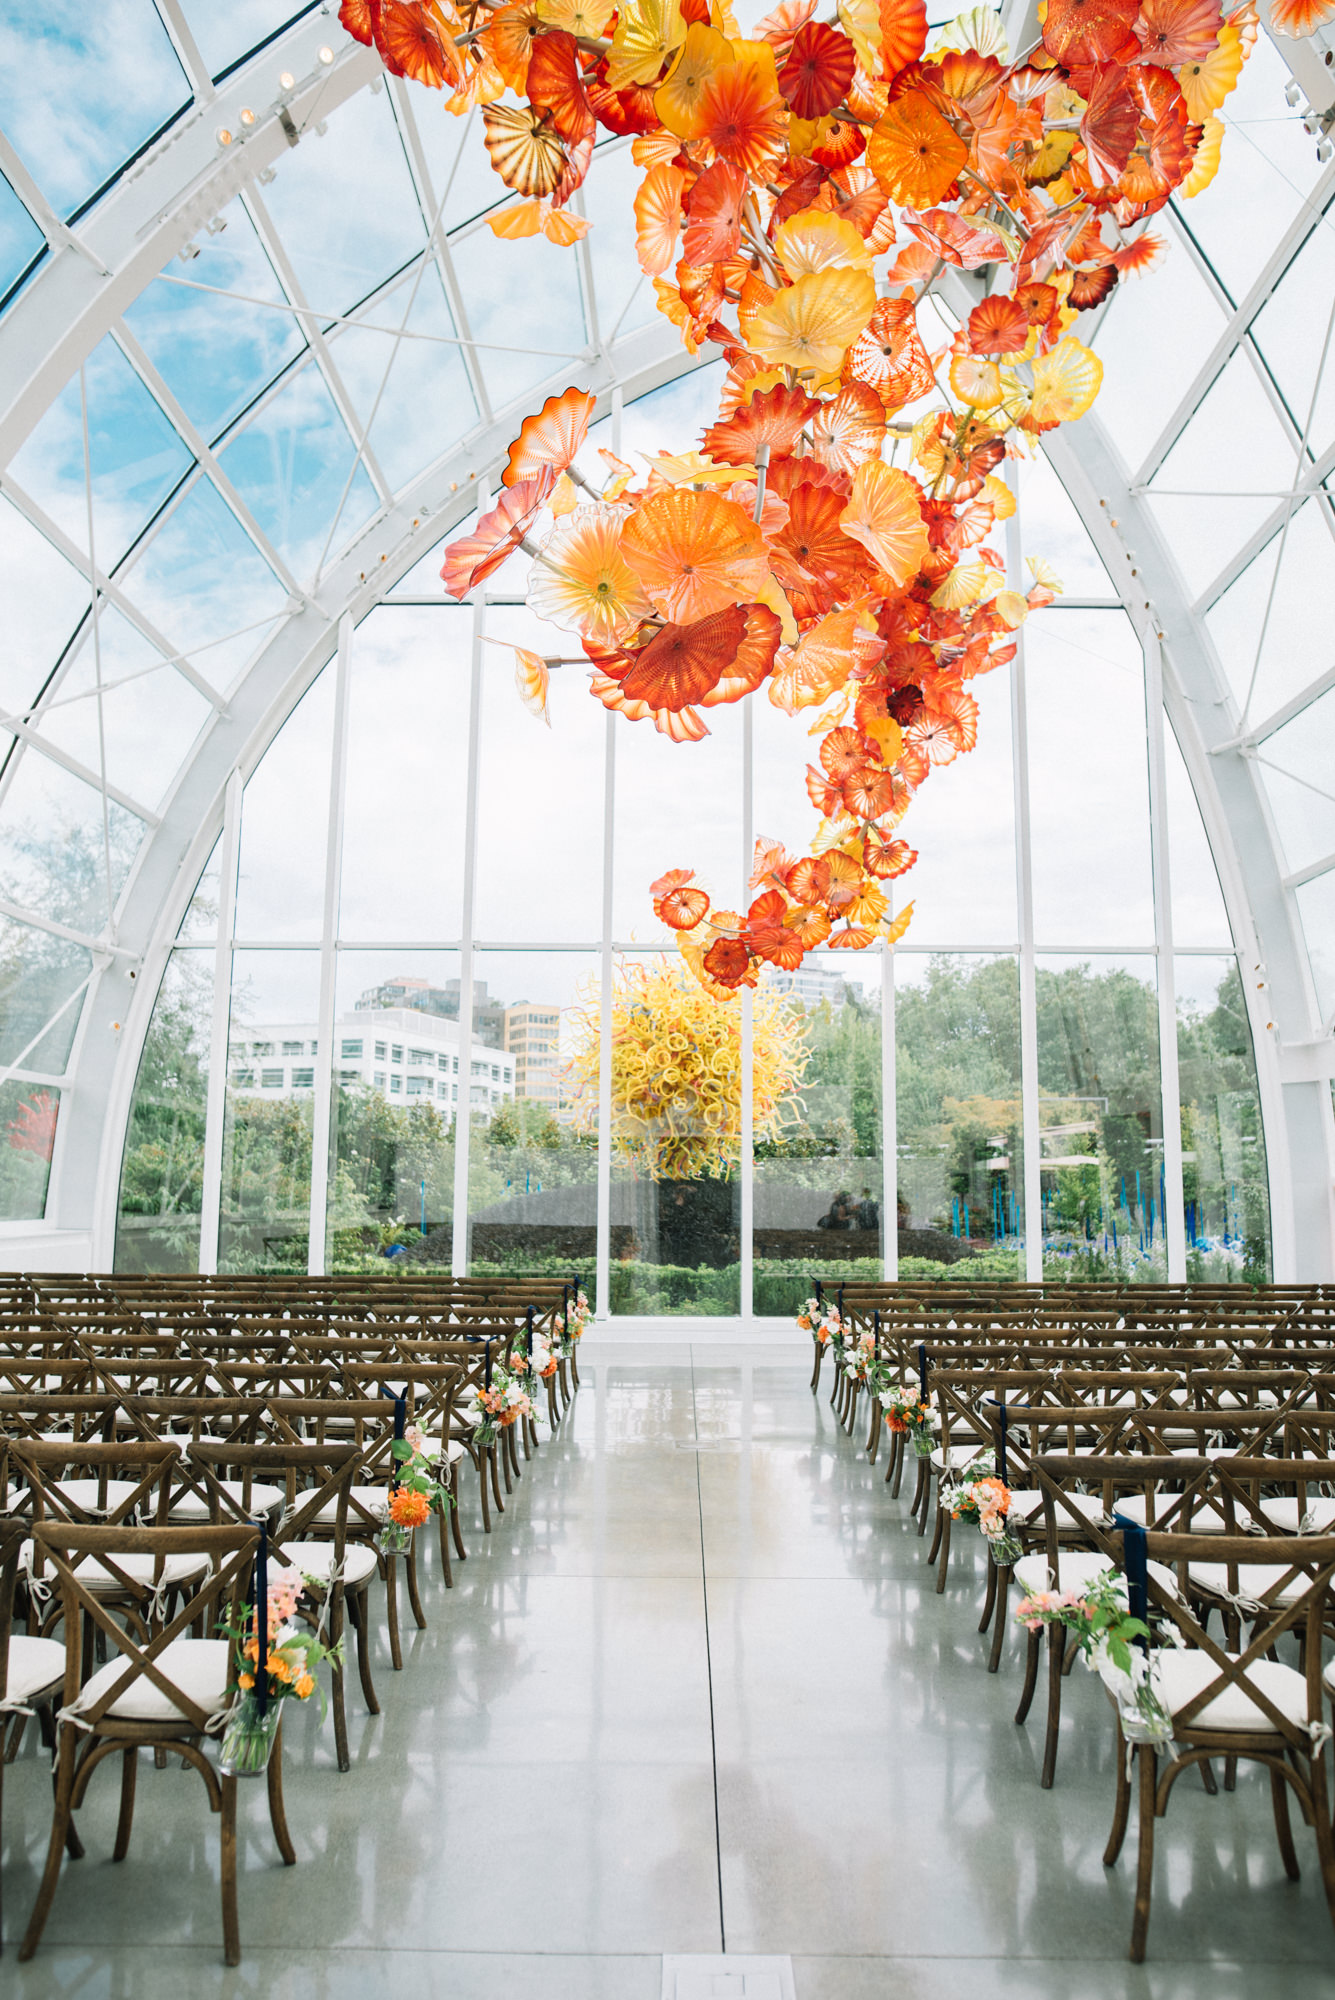 The Chihuly Garden and Glass is all decked out for Amy and Jeremy's wedding